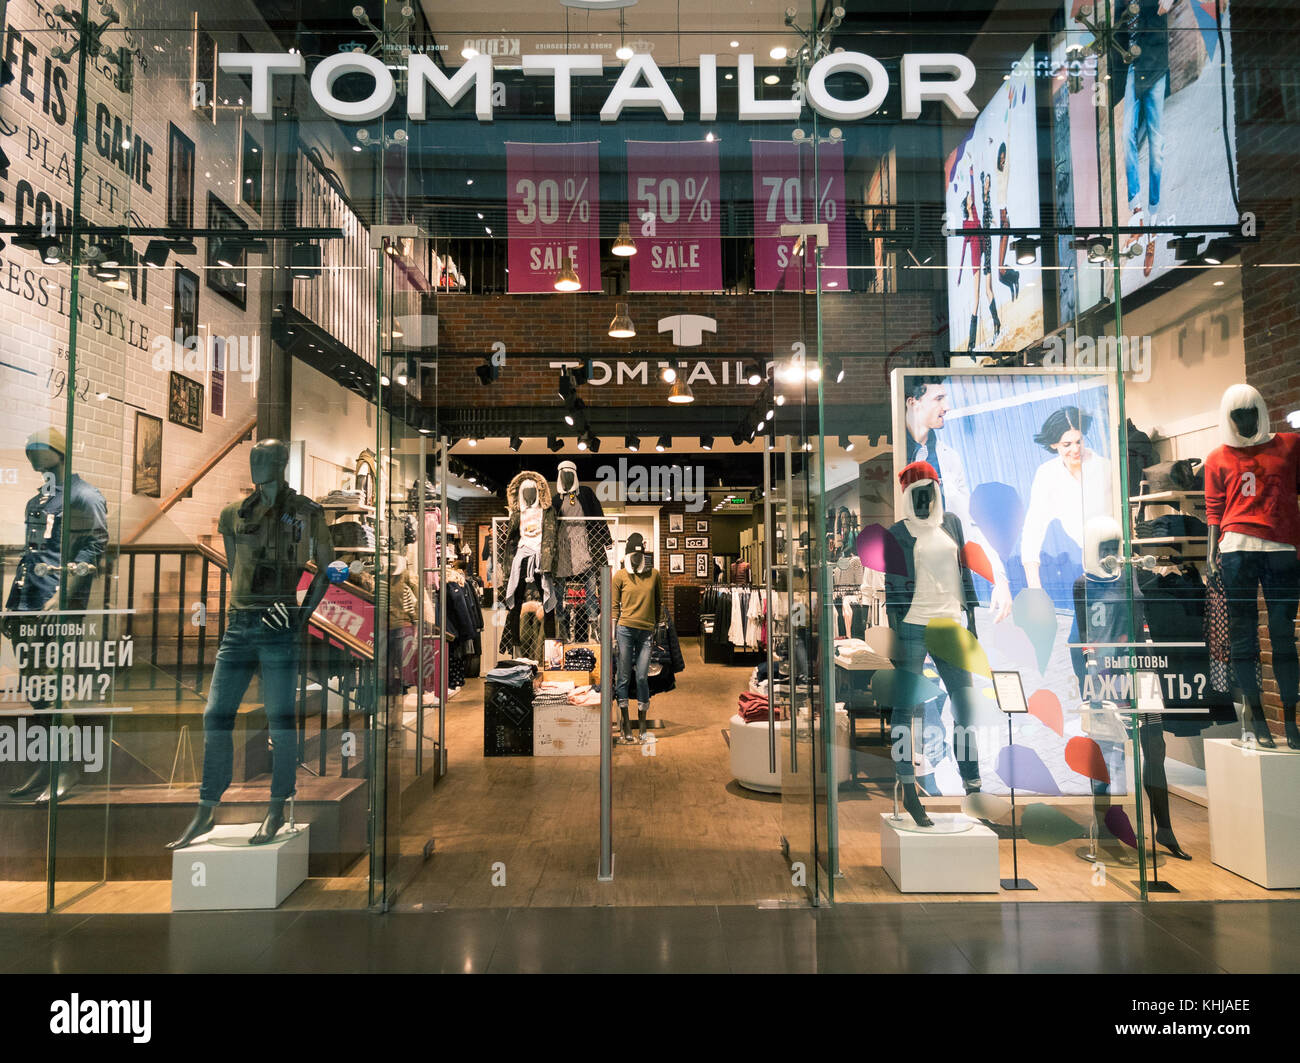 Tom Tailor High Resolution Stock Photography and Images - Alamy